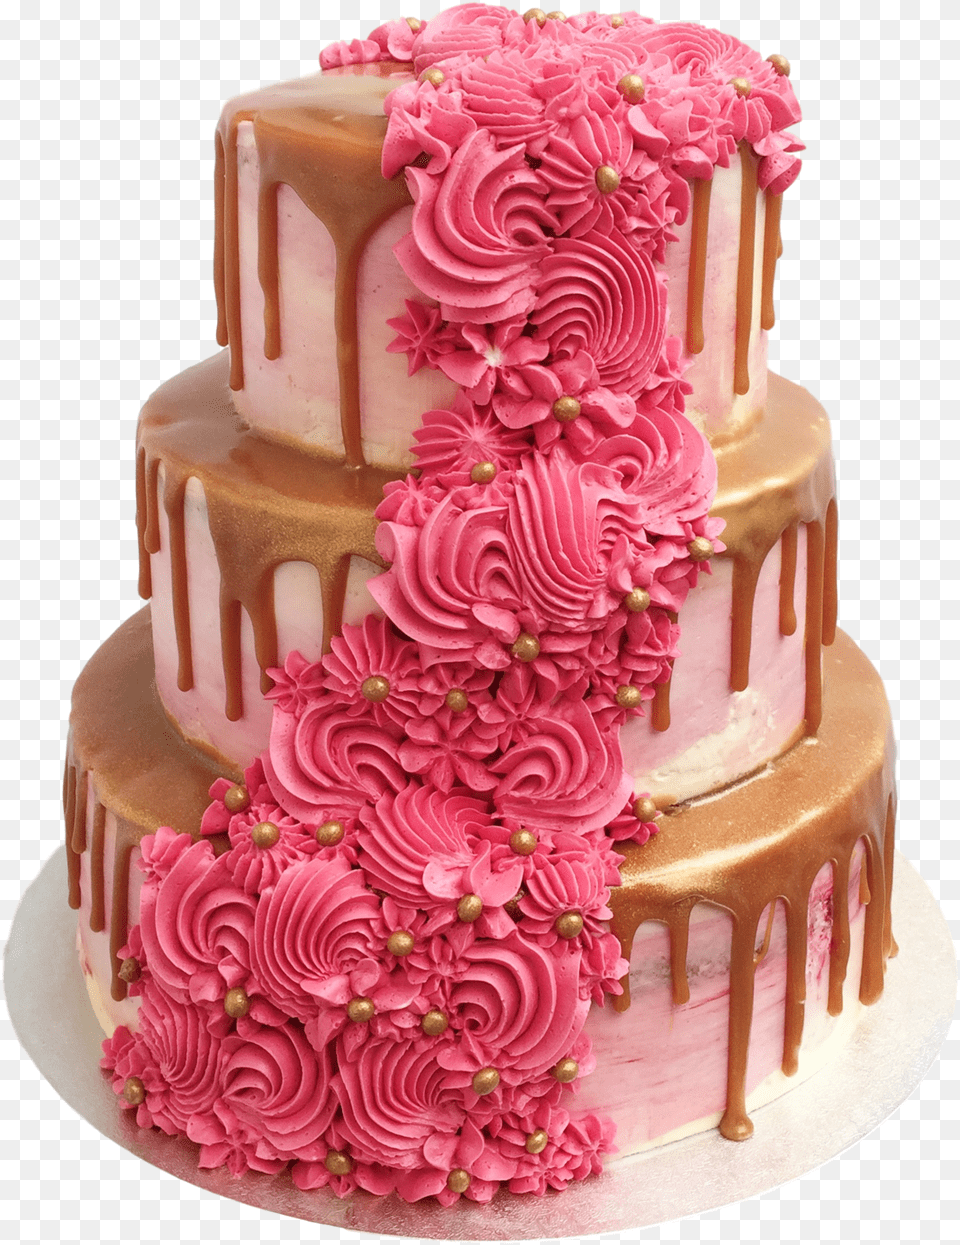 Clip Art Pink Gold Cakes Cake Images Hd, Dessert, Food, Birthday Cake, Cream Free Transparent Png